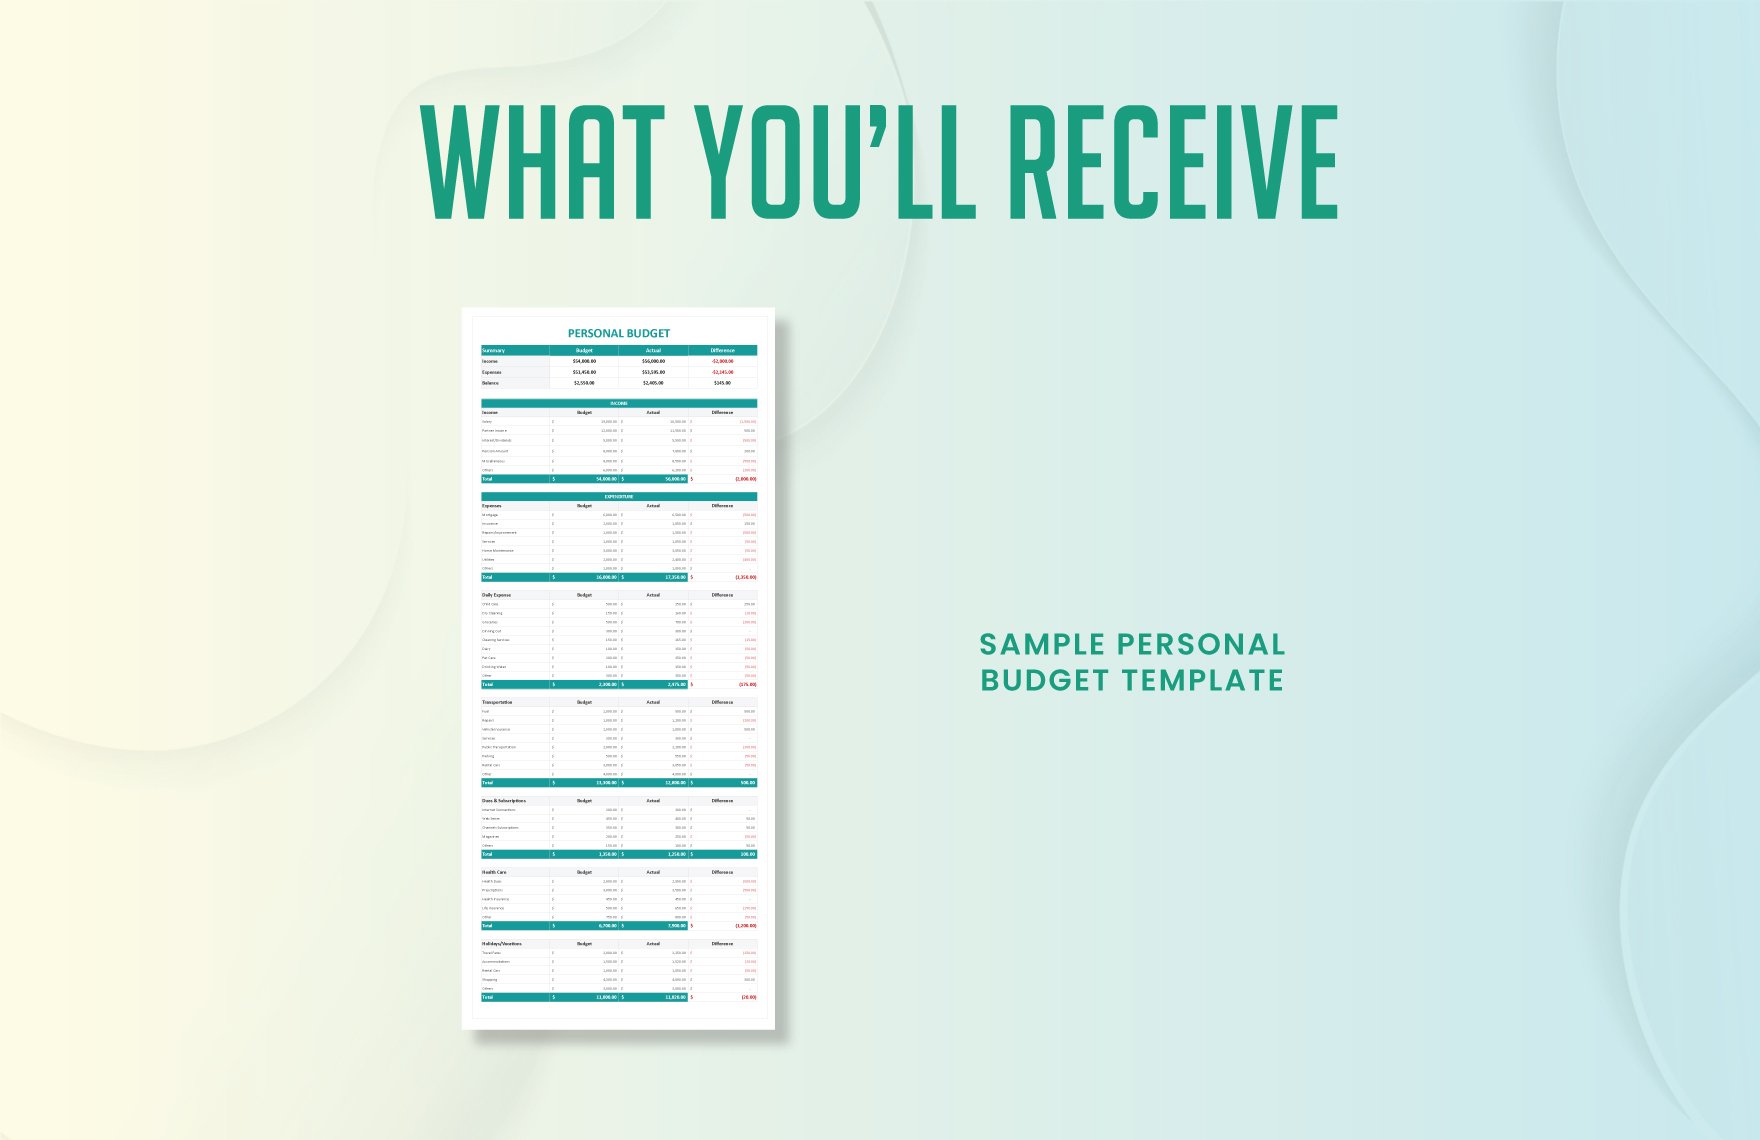 Sample Personal Budget Template